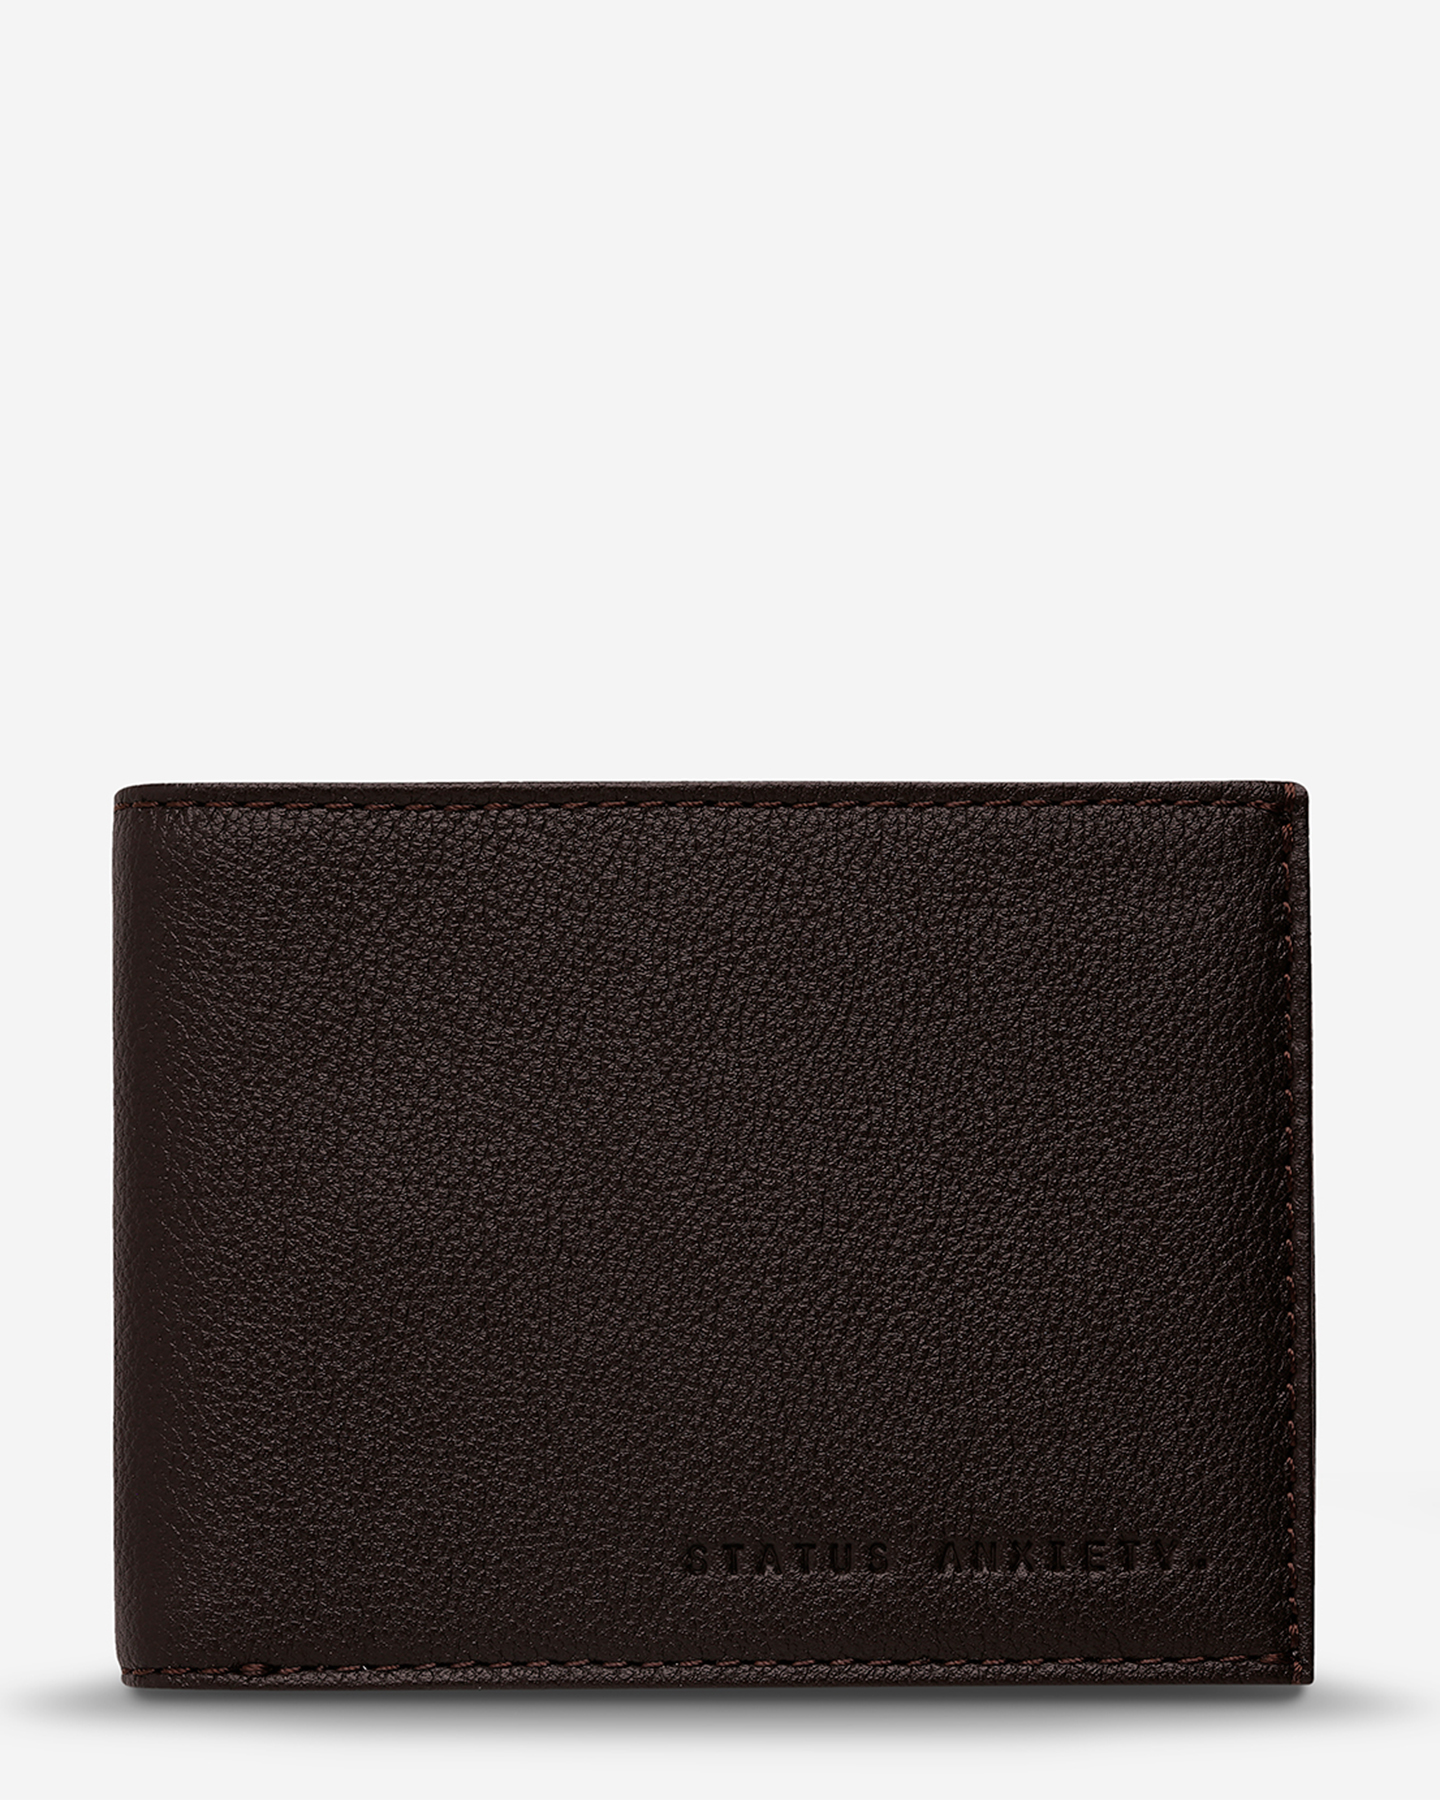 Status Anxiety Noah Leather Wallet - Chocolate | SurfStitch